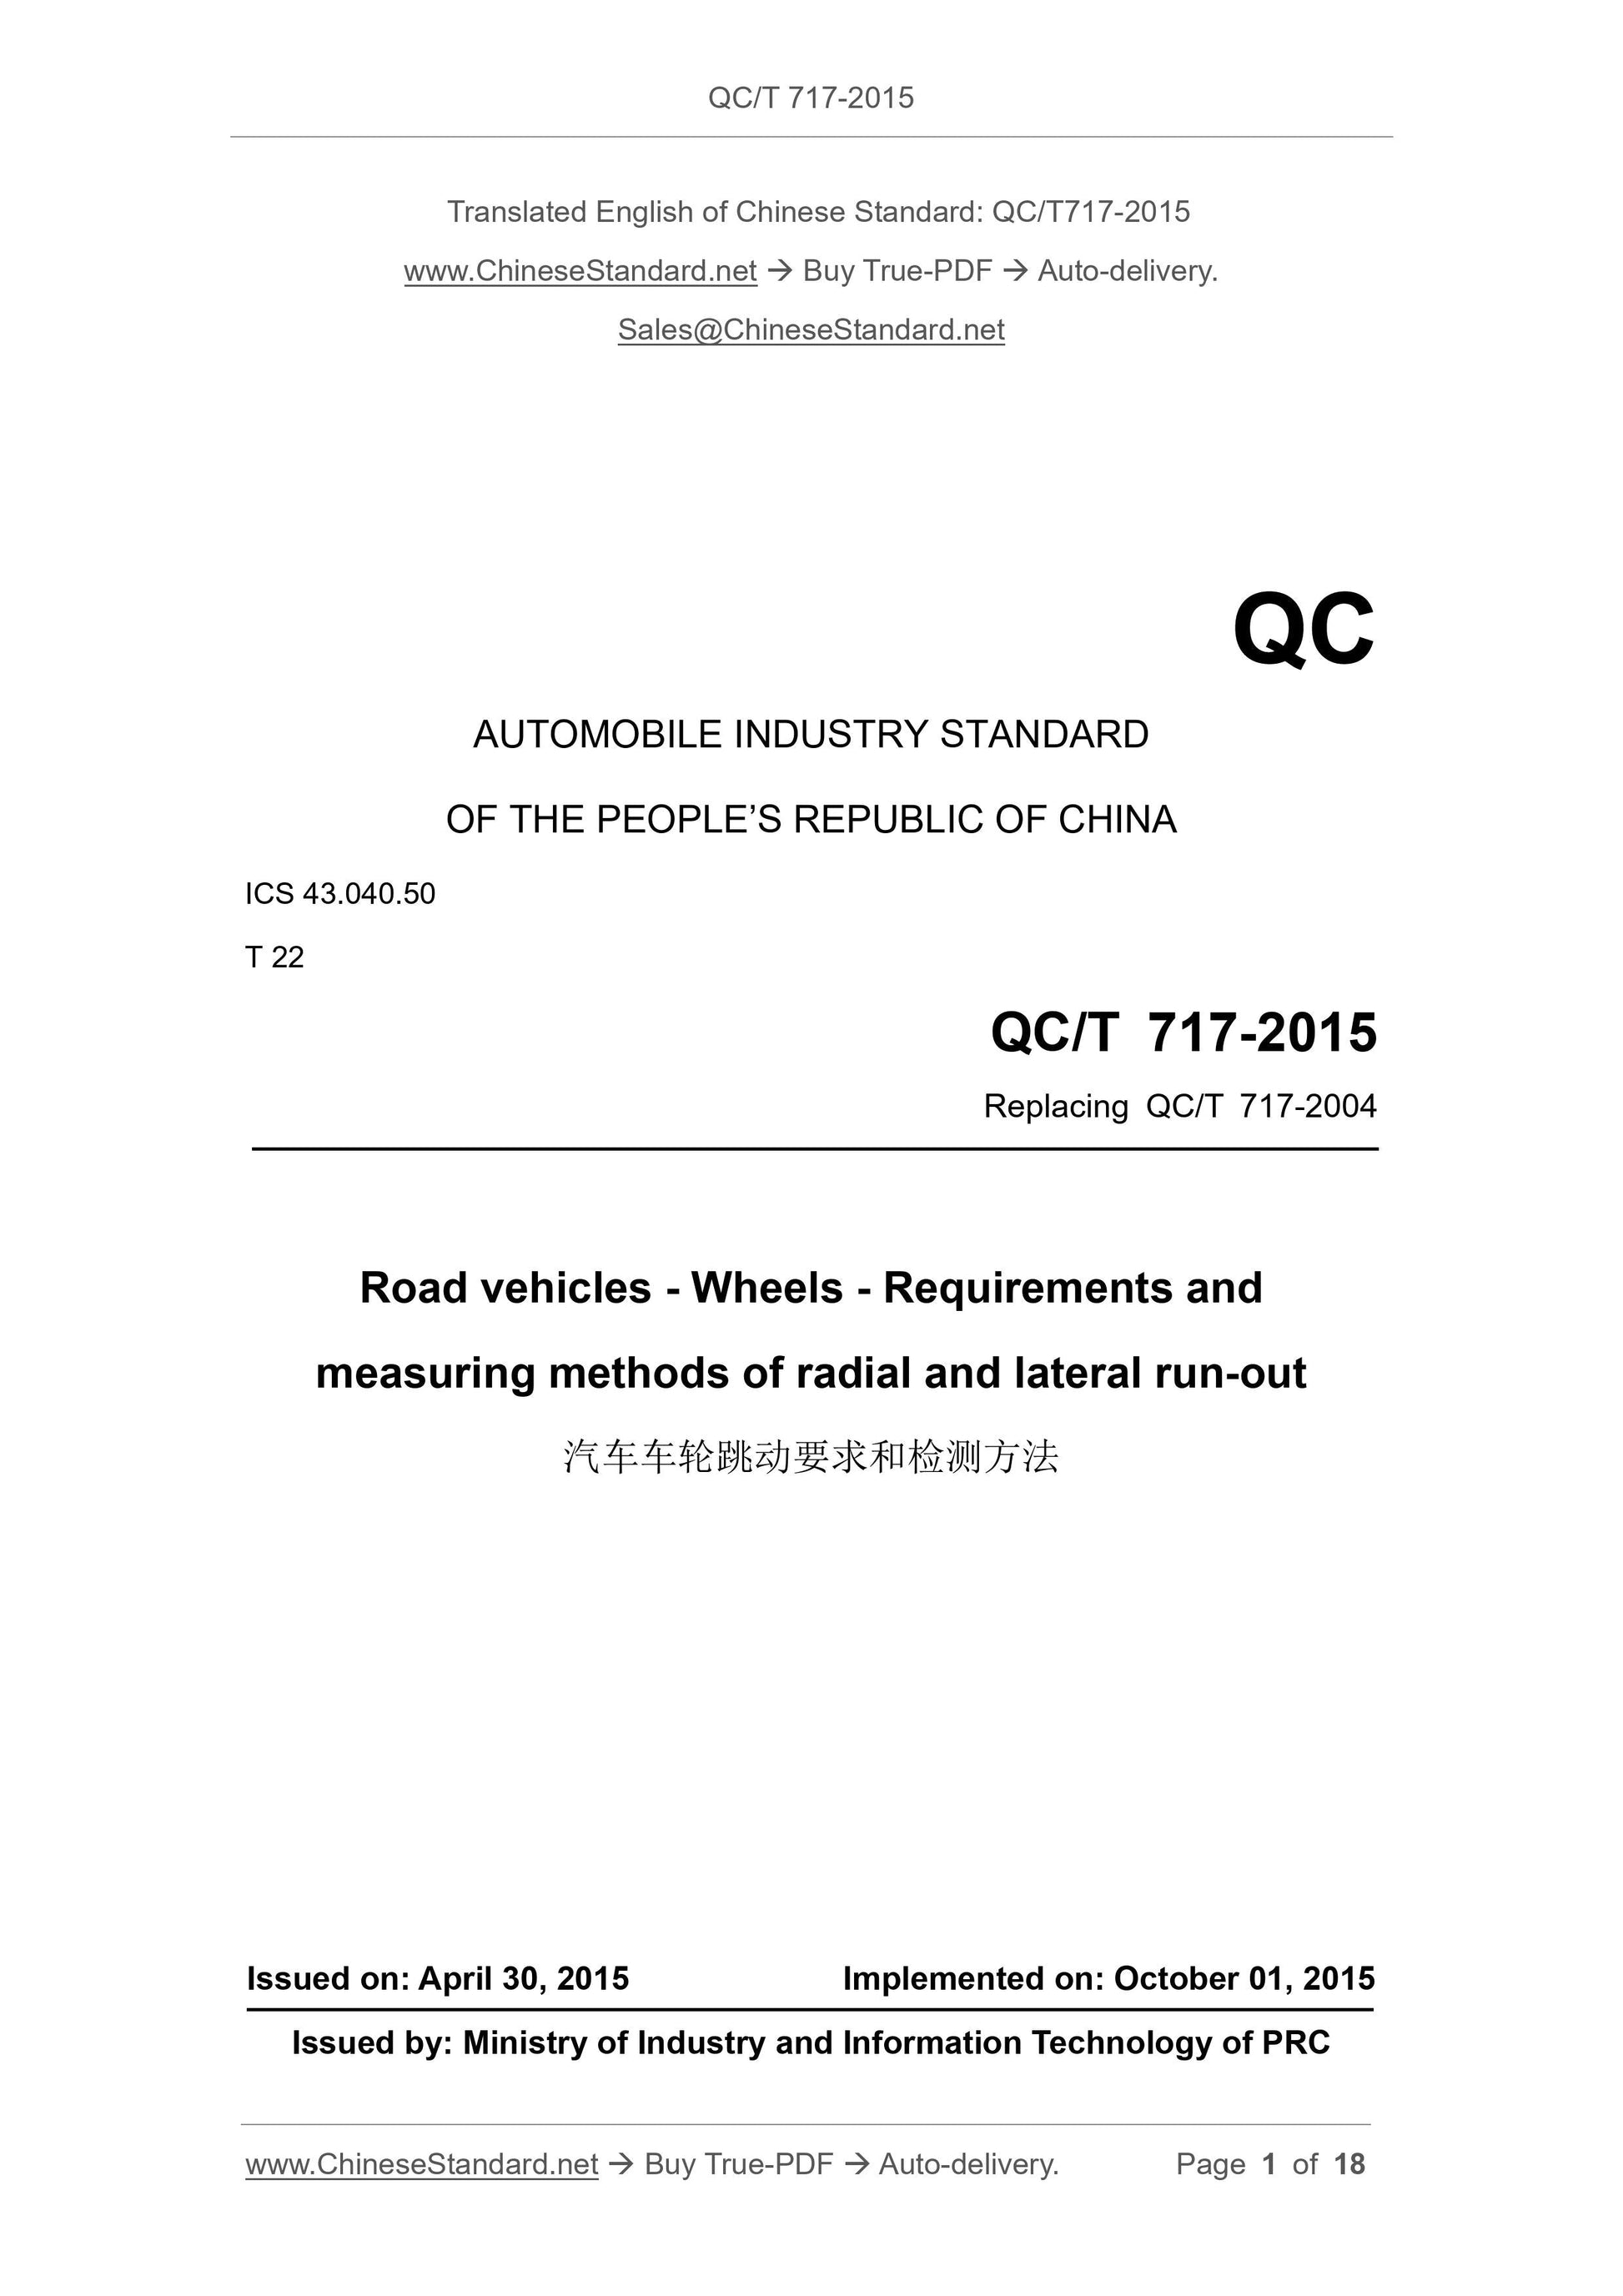 QC/T 717-2015 Page 1